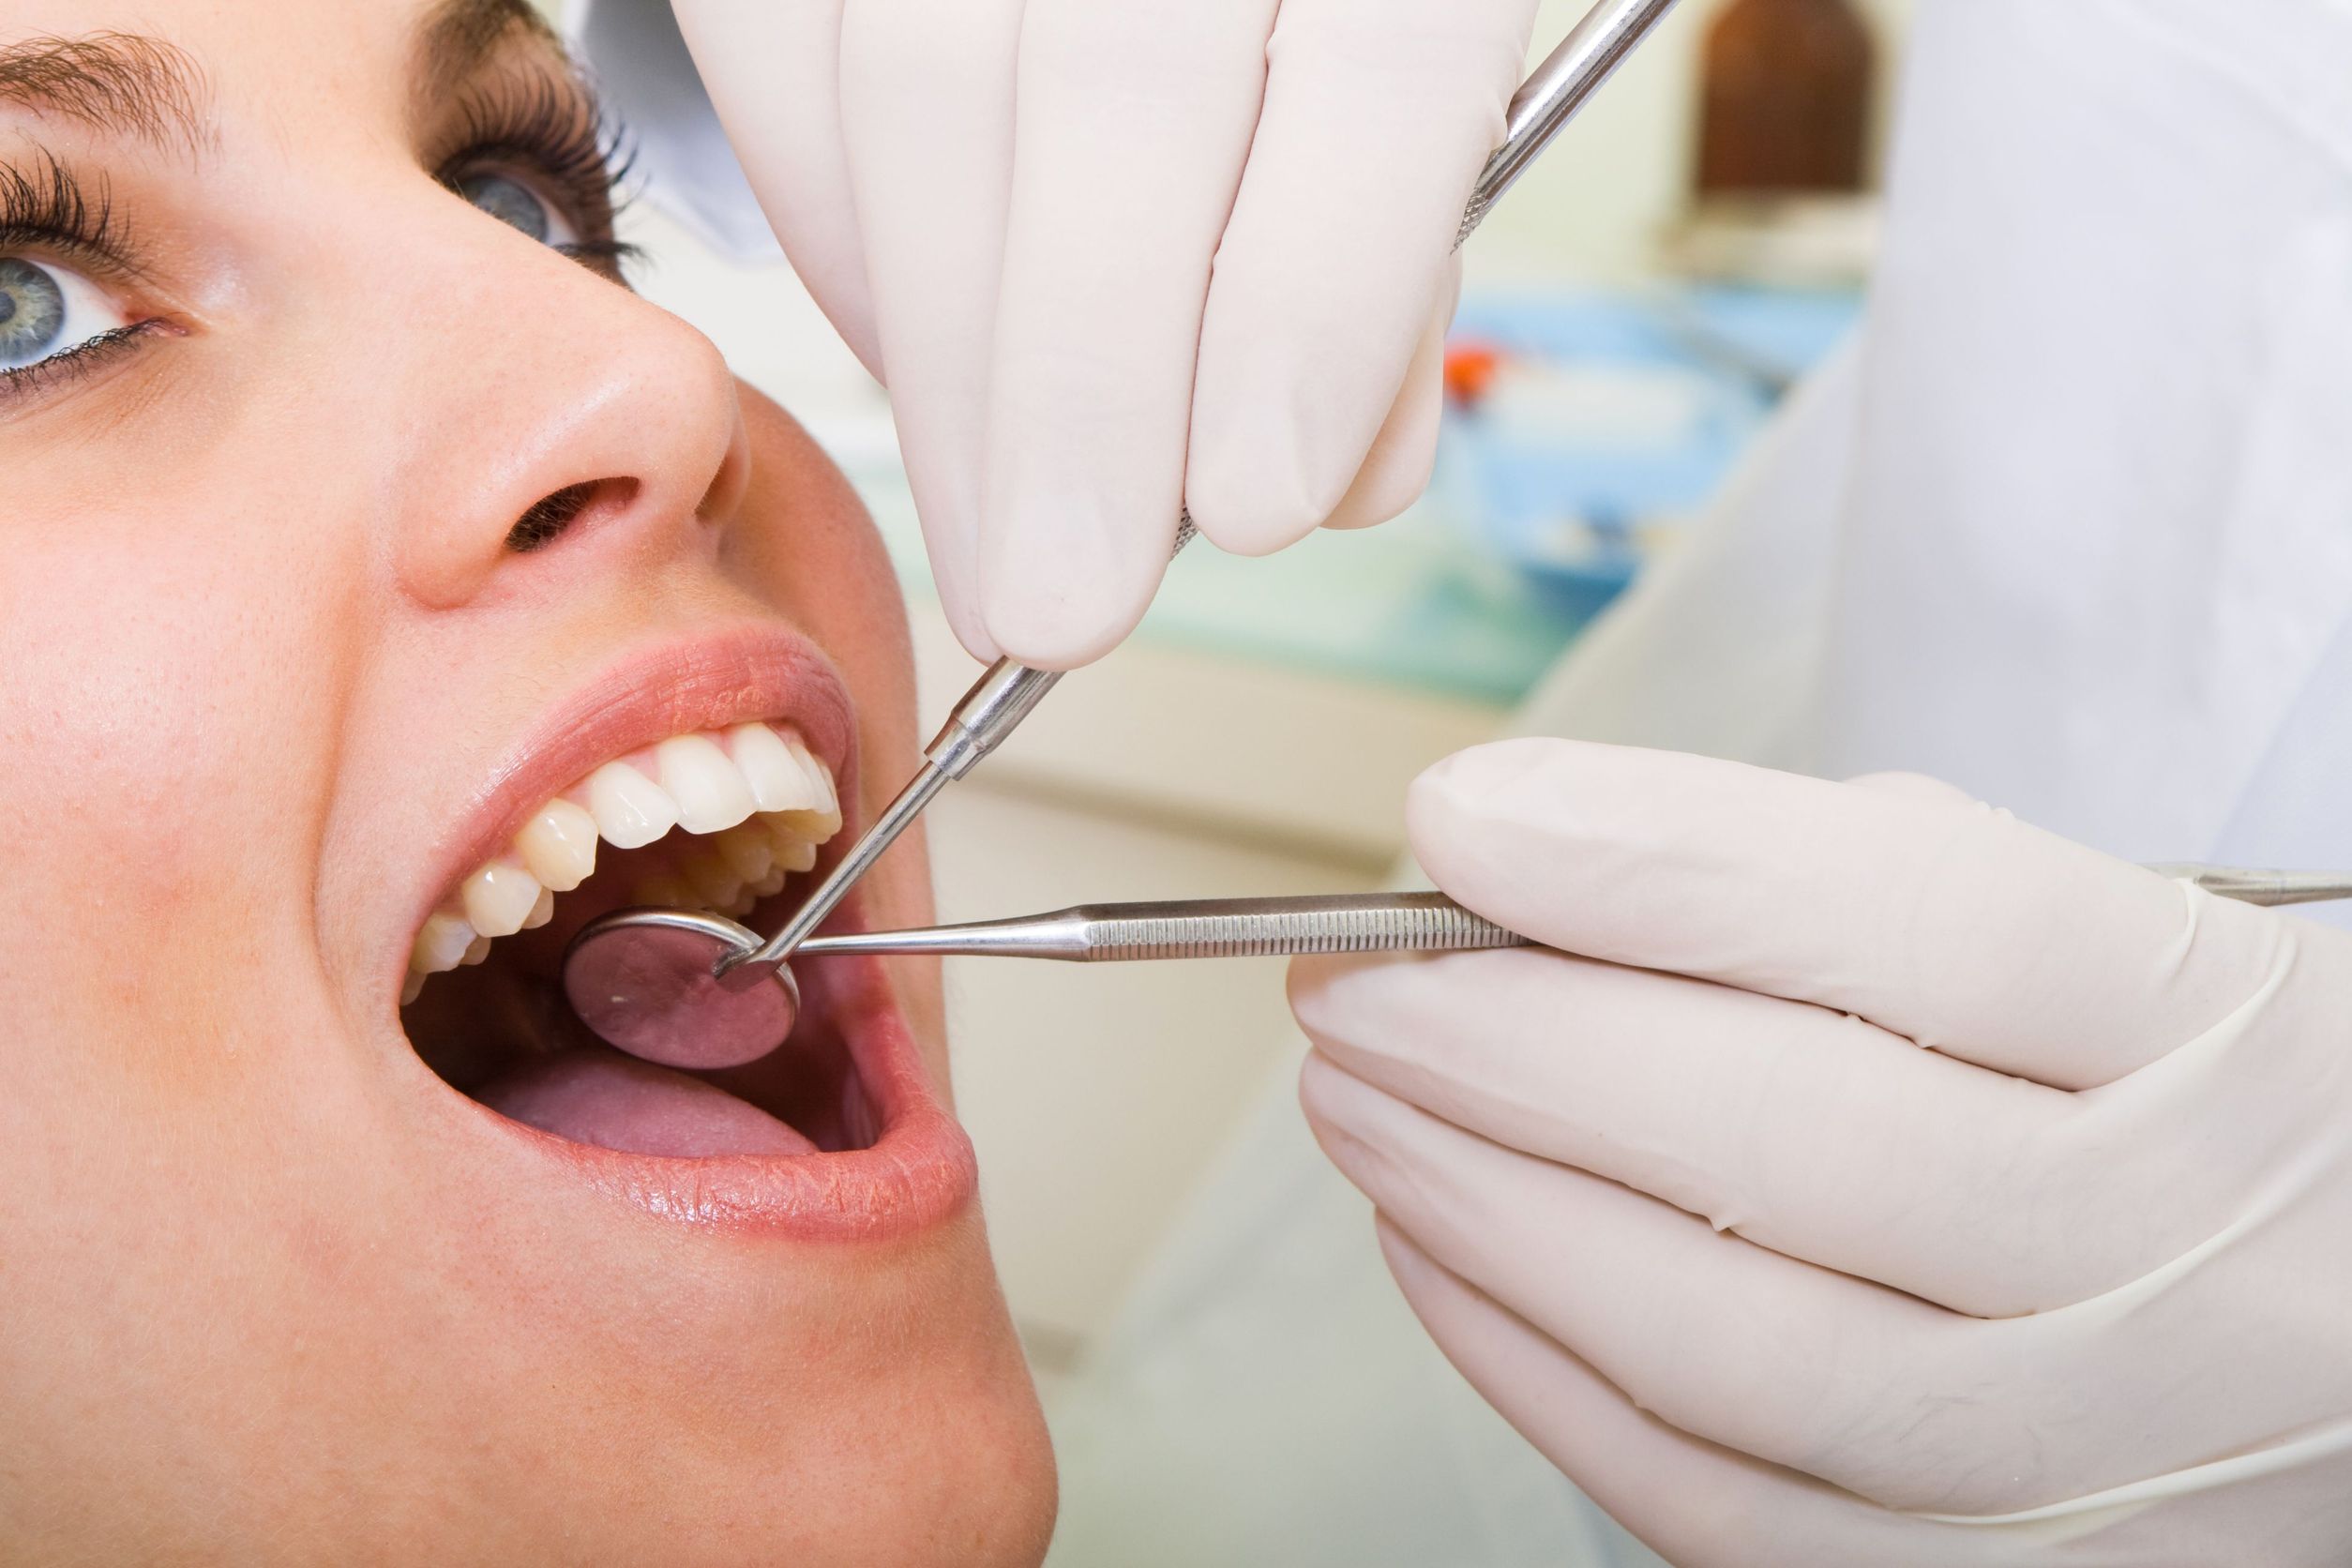 Cosmetic Dentists - Tips To Look For While Finding The Best One